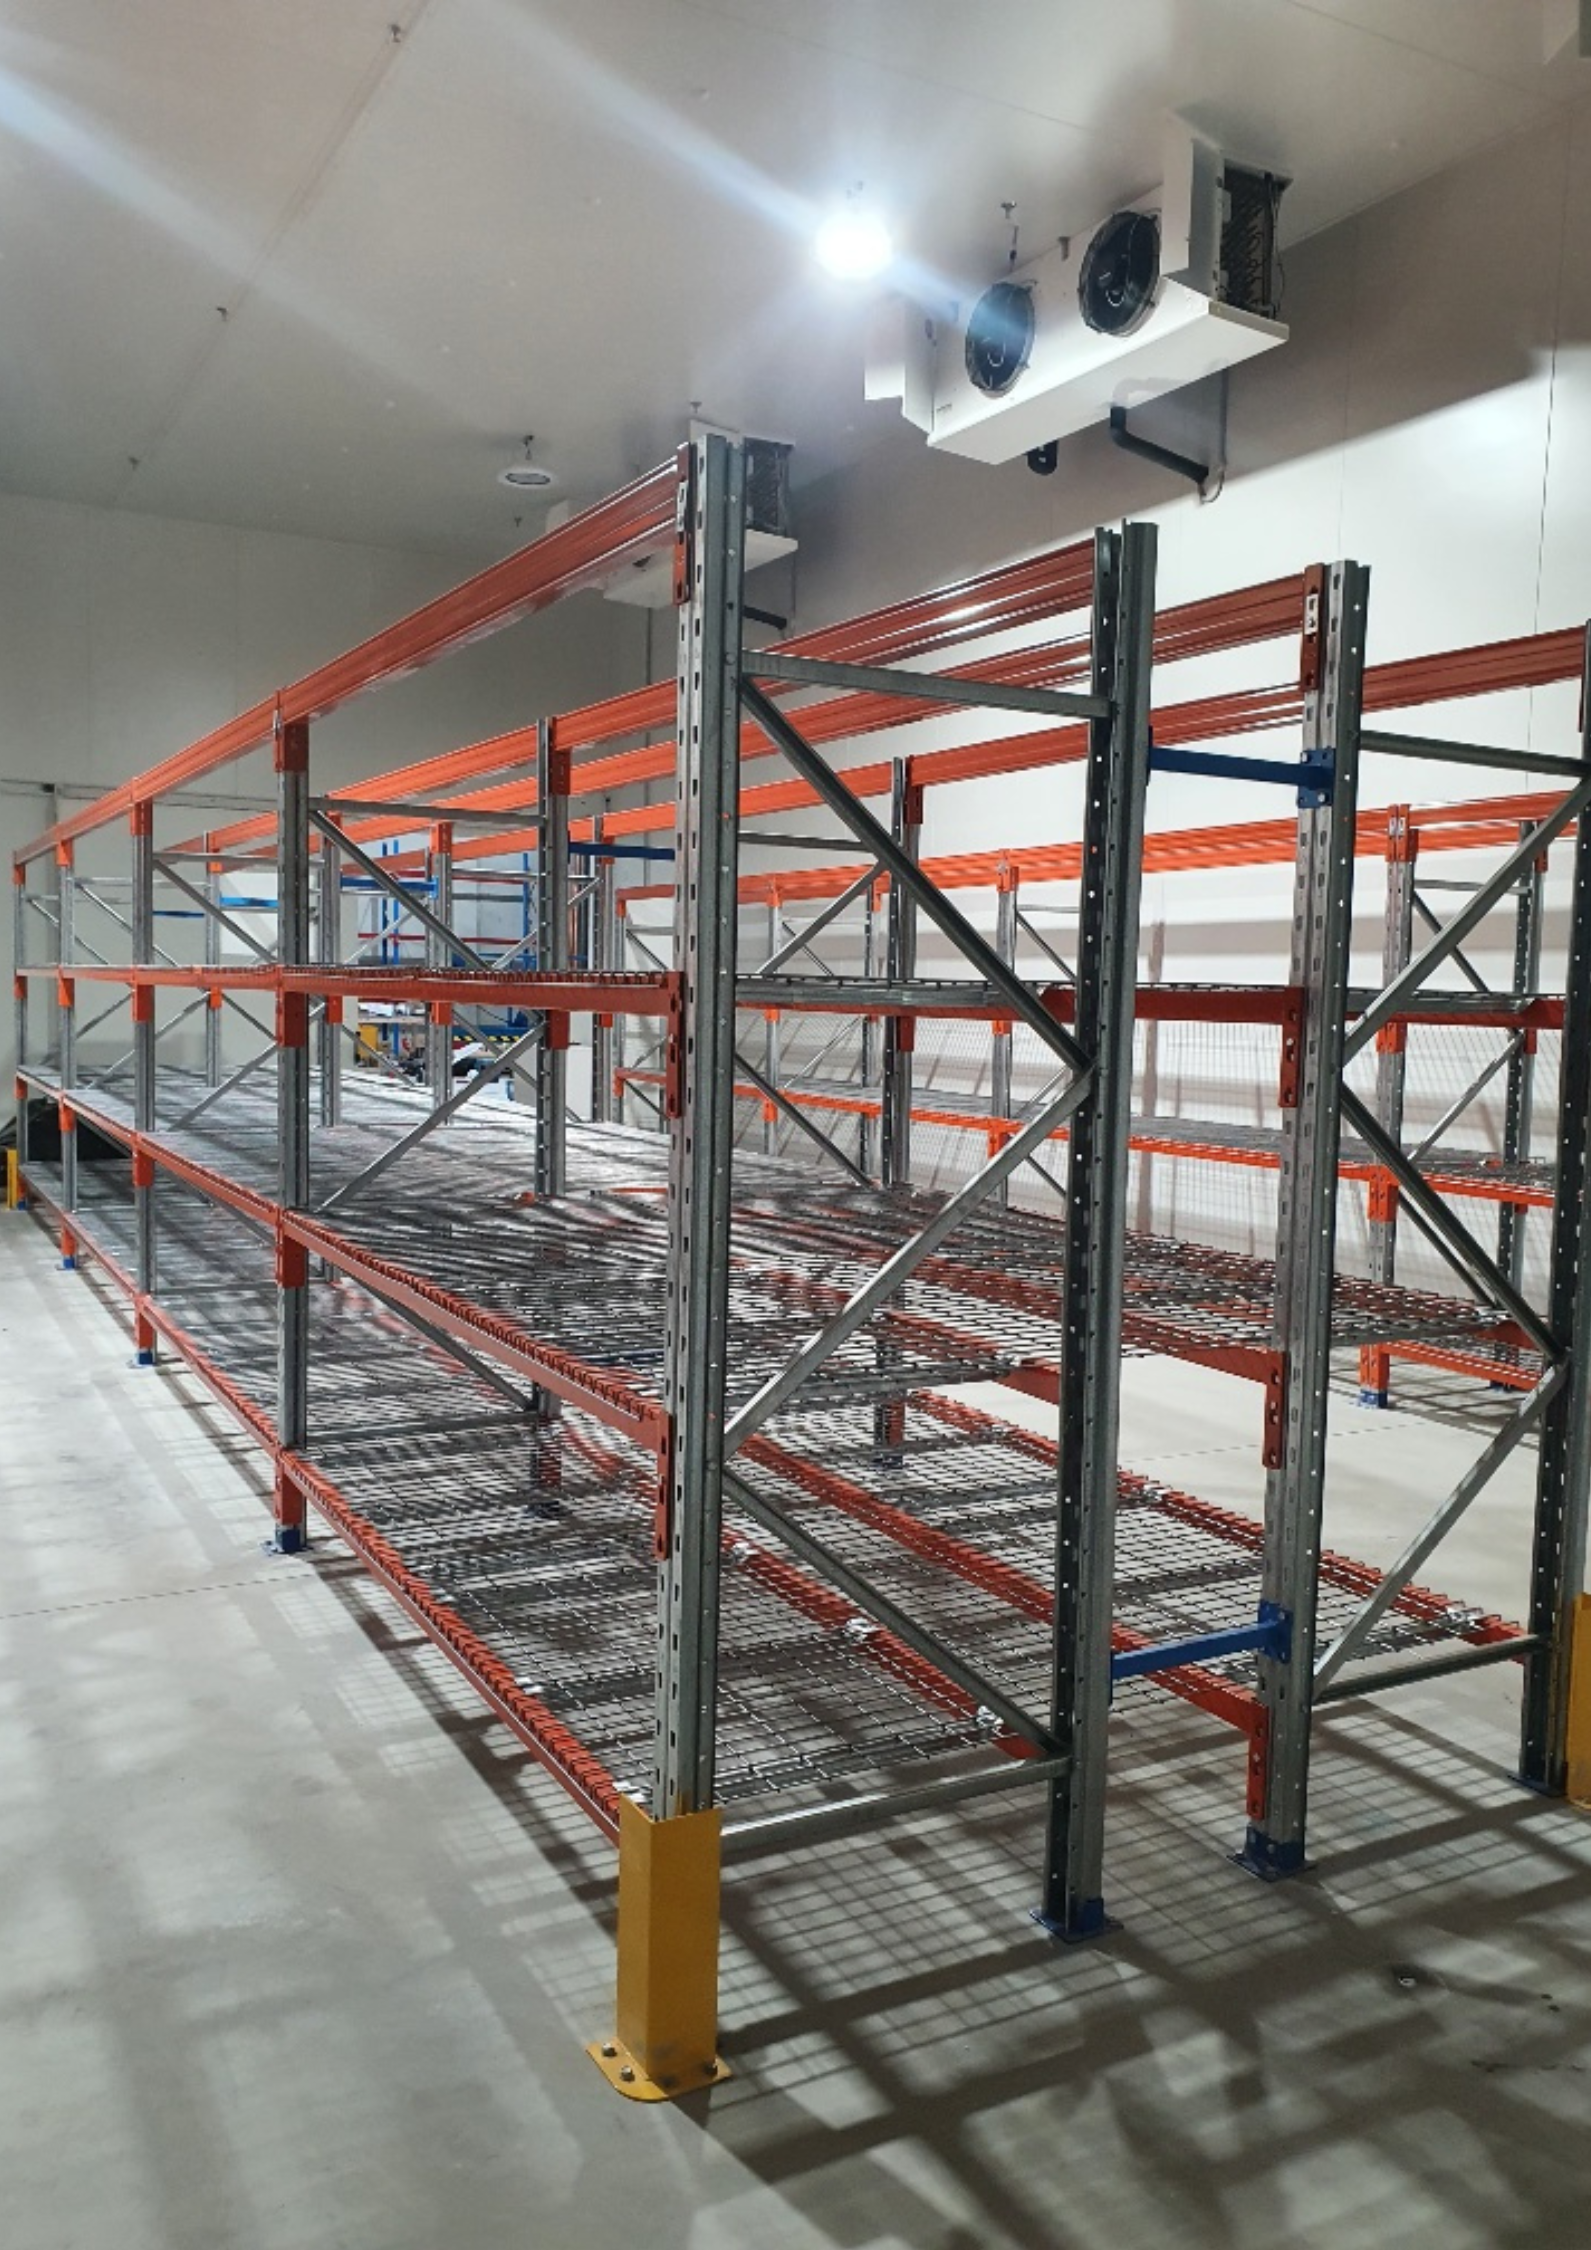 ReadyRack Pallet Racking Add On Bay 2438mm High with Mesh